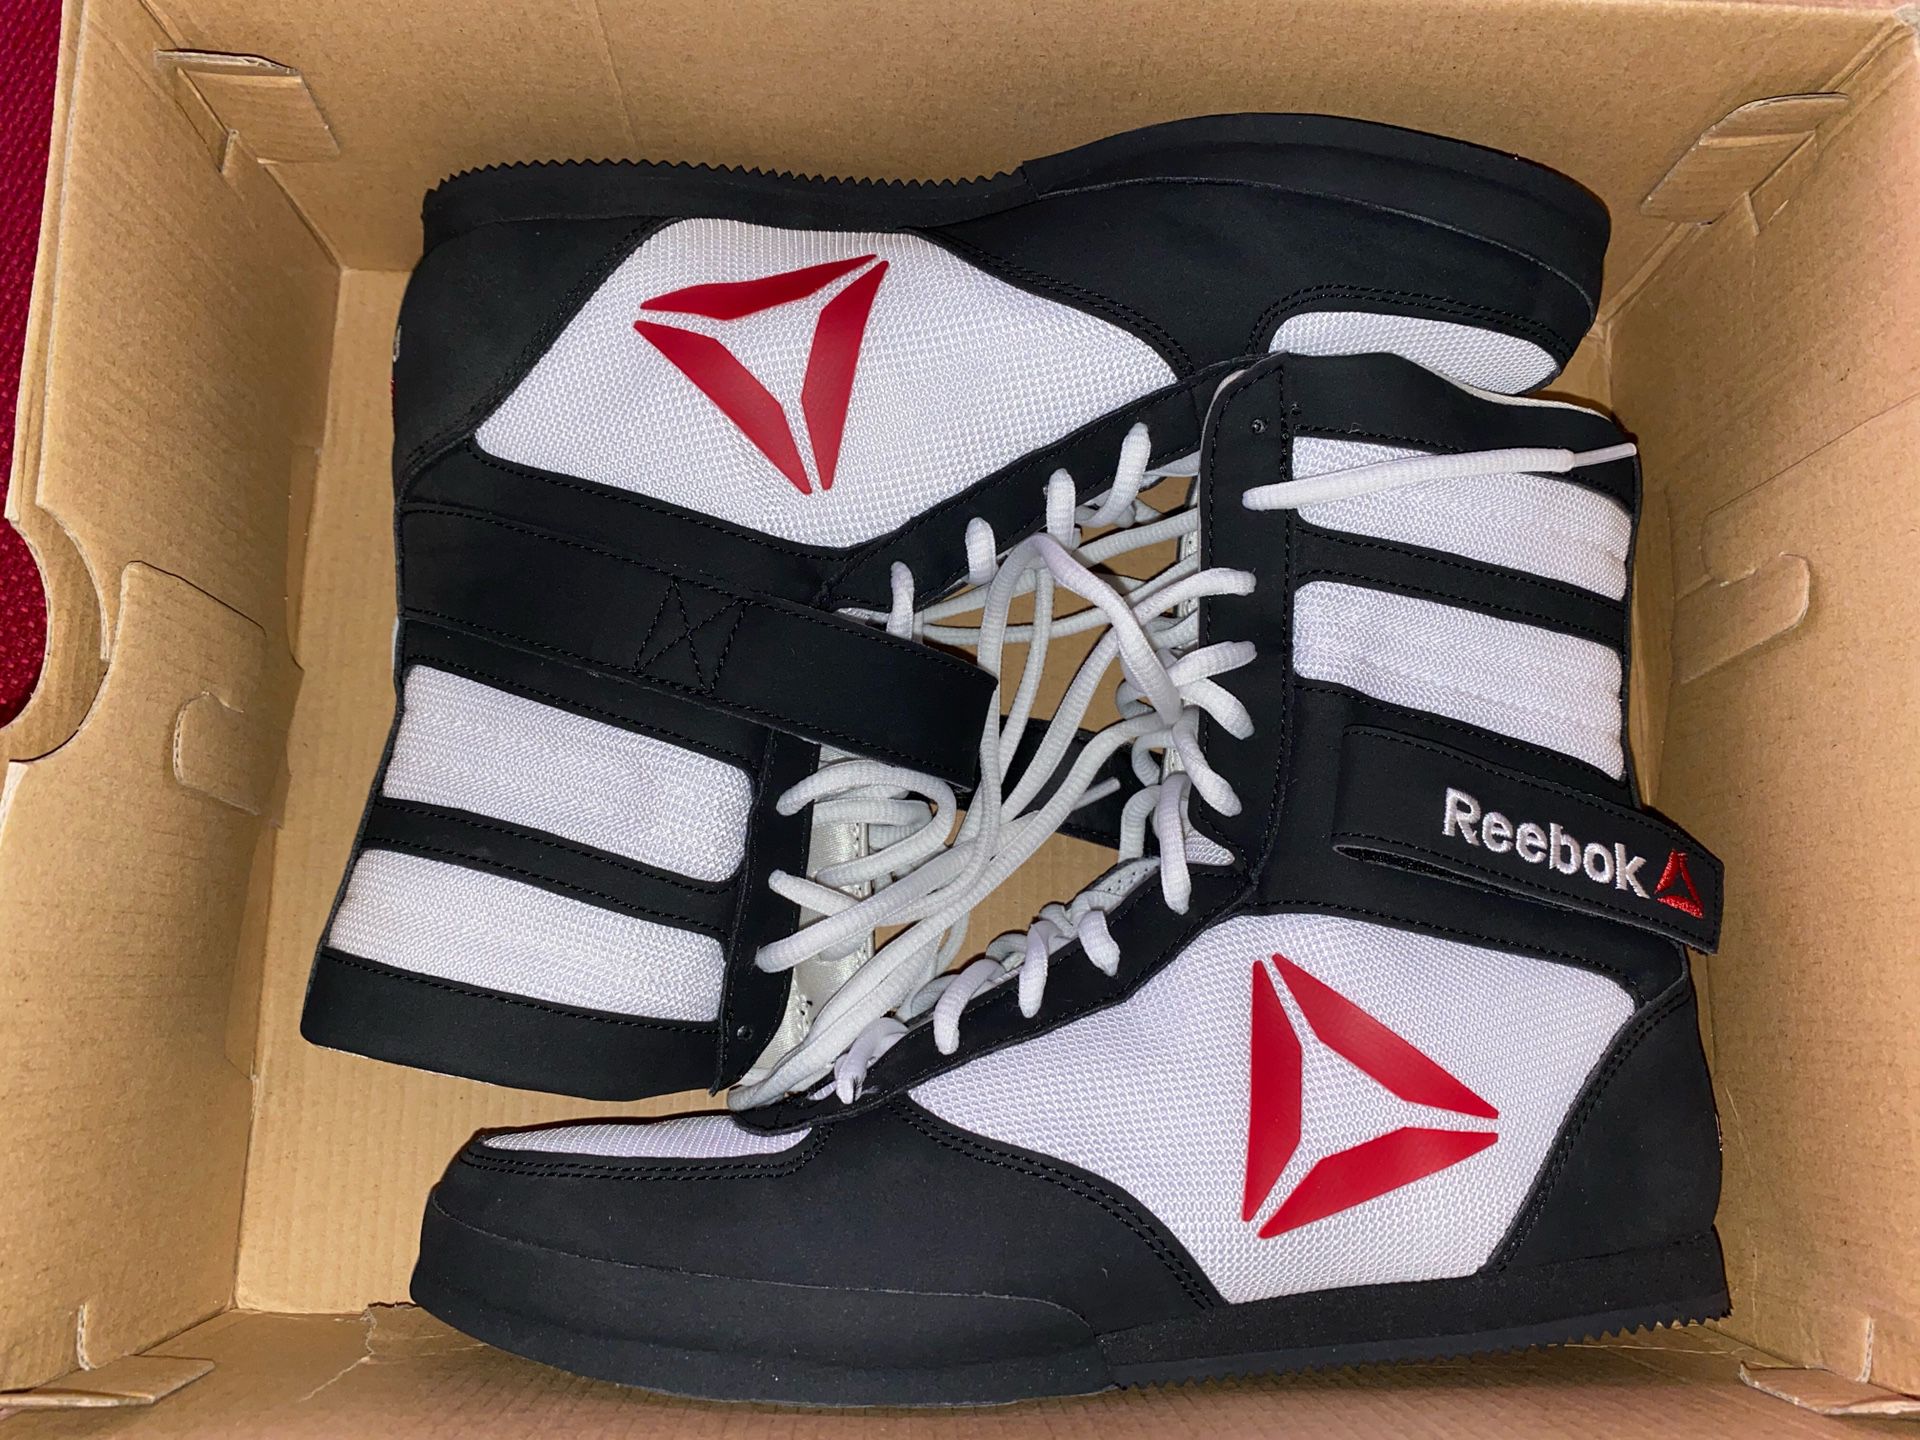 Reebok Renegade Pro Boxing Boots for Sale in Los Angeles, CA - OfferUp